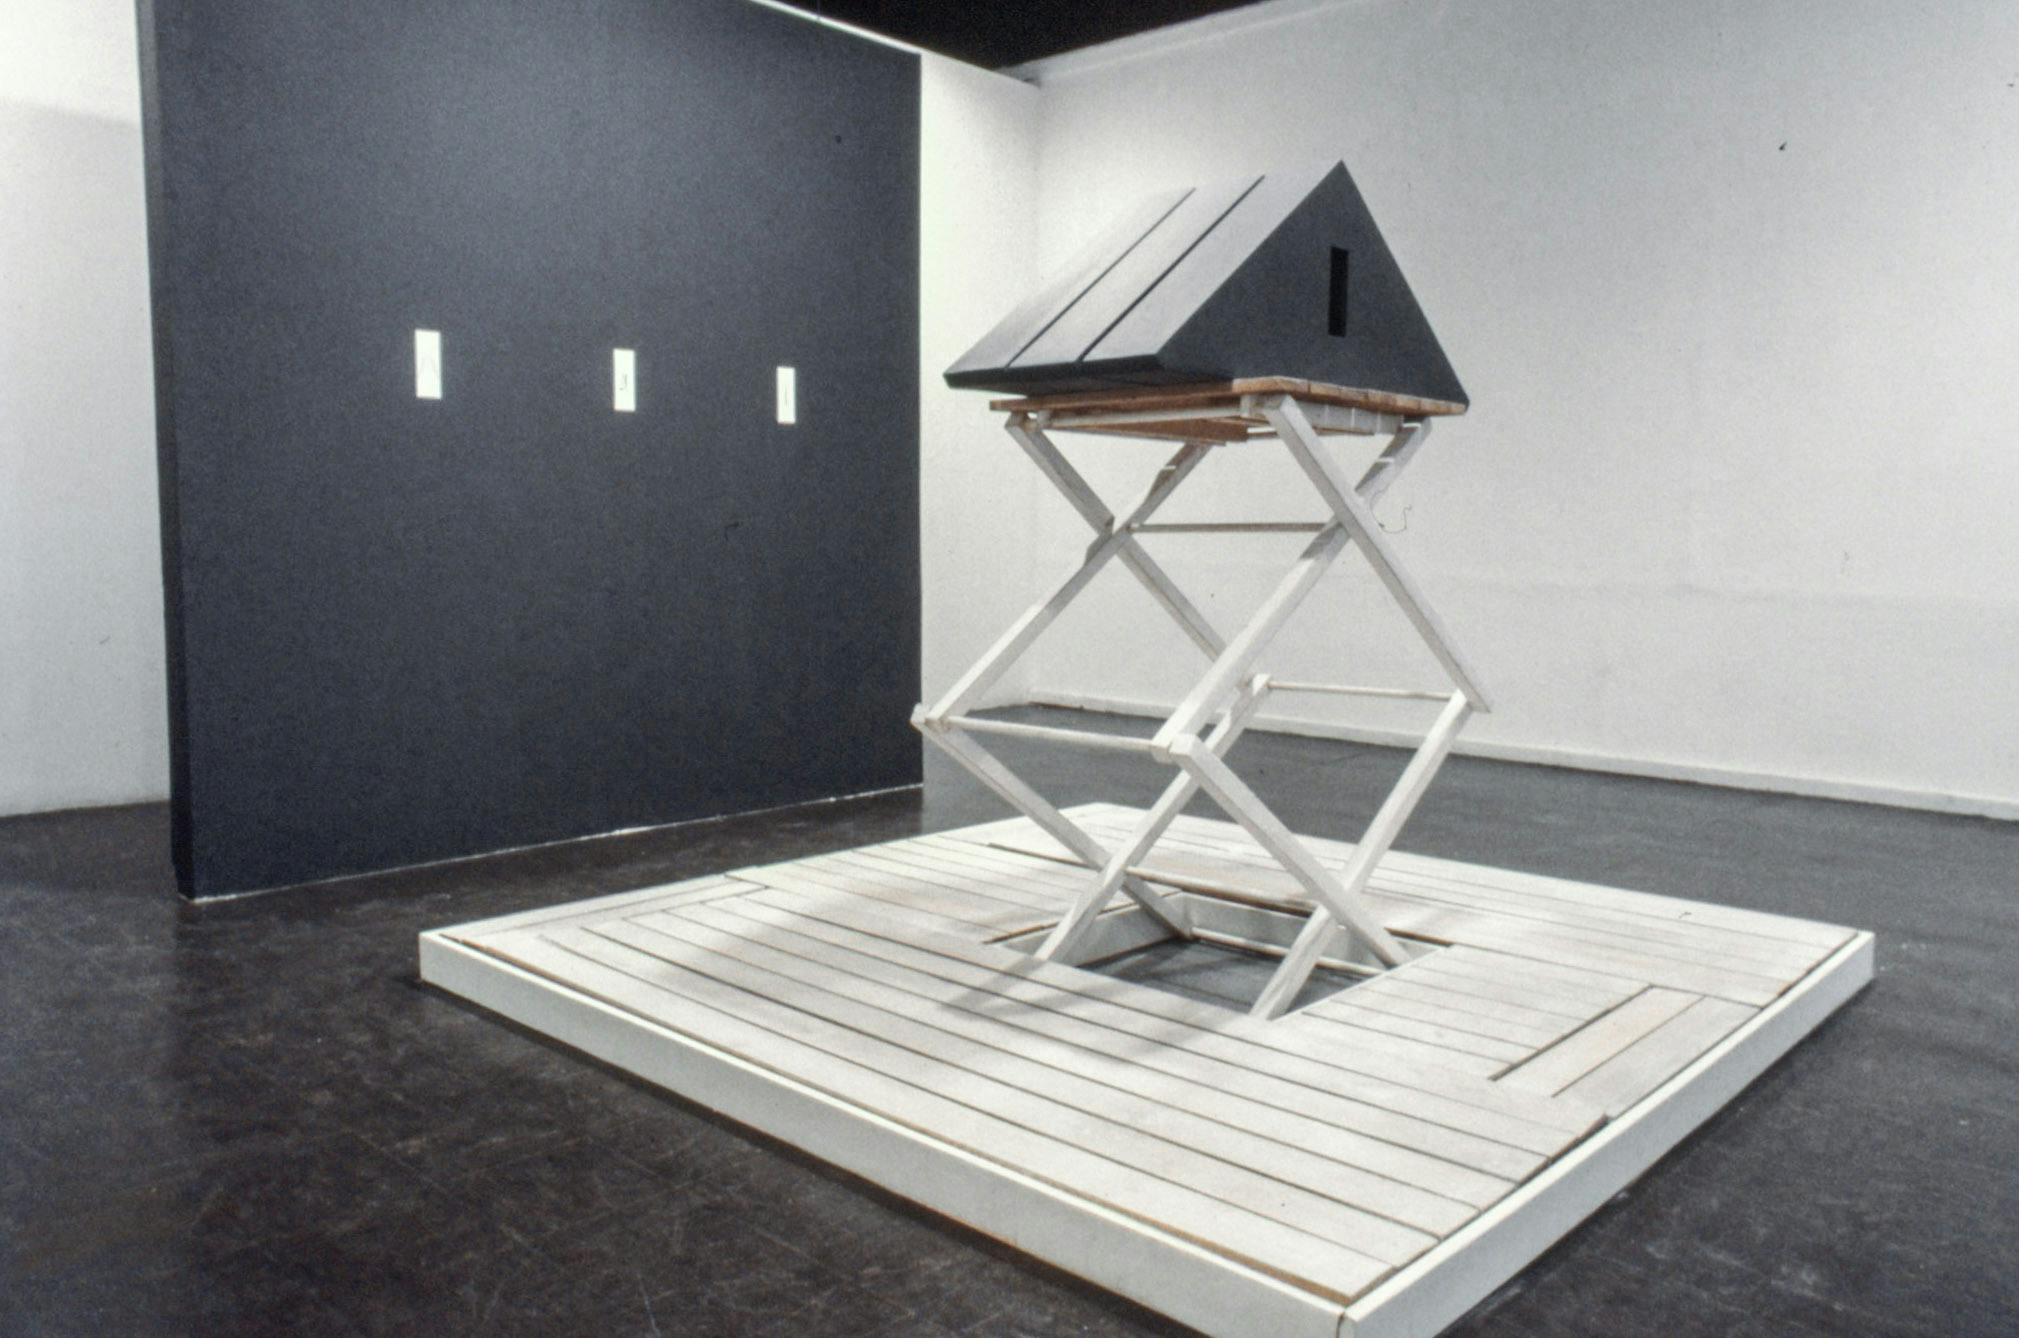 A closeup of a sculpture in a gallery. It is made of 3 narrow black pyramids stacked together on a scissor lift, placed on white wood planks. Behind the sculpture, there is a black divider wall.